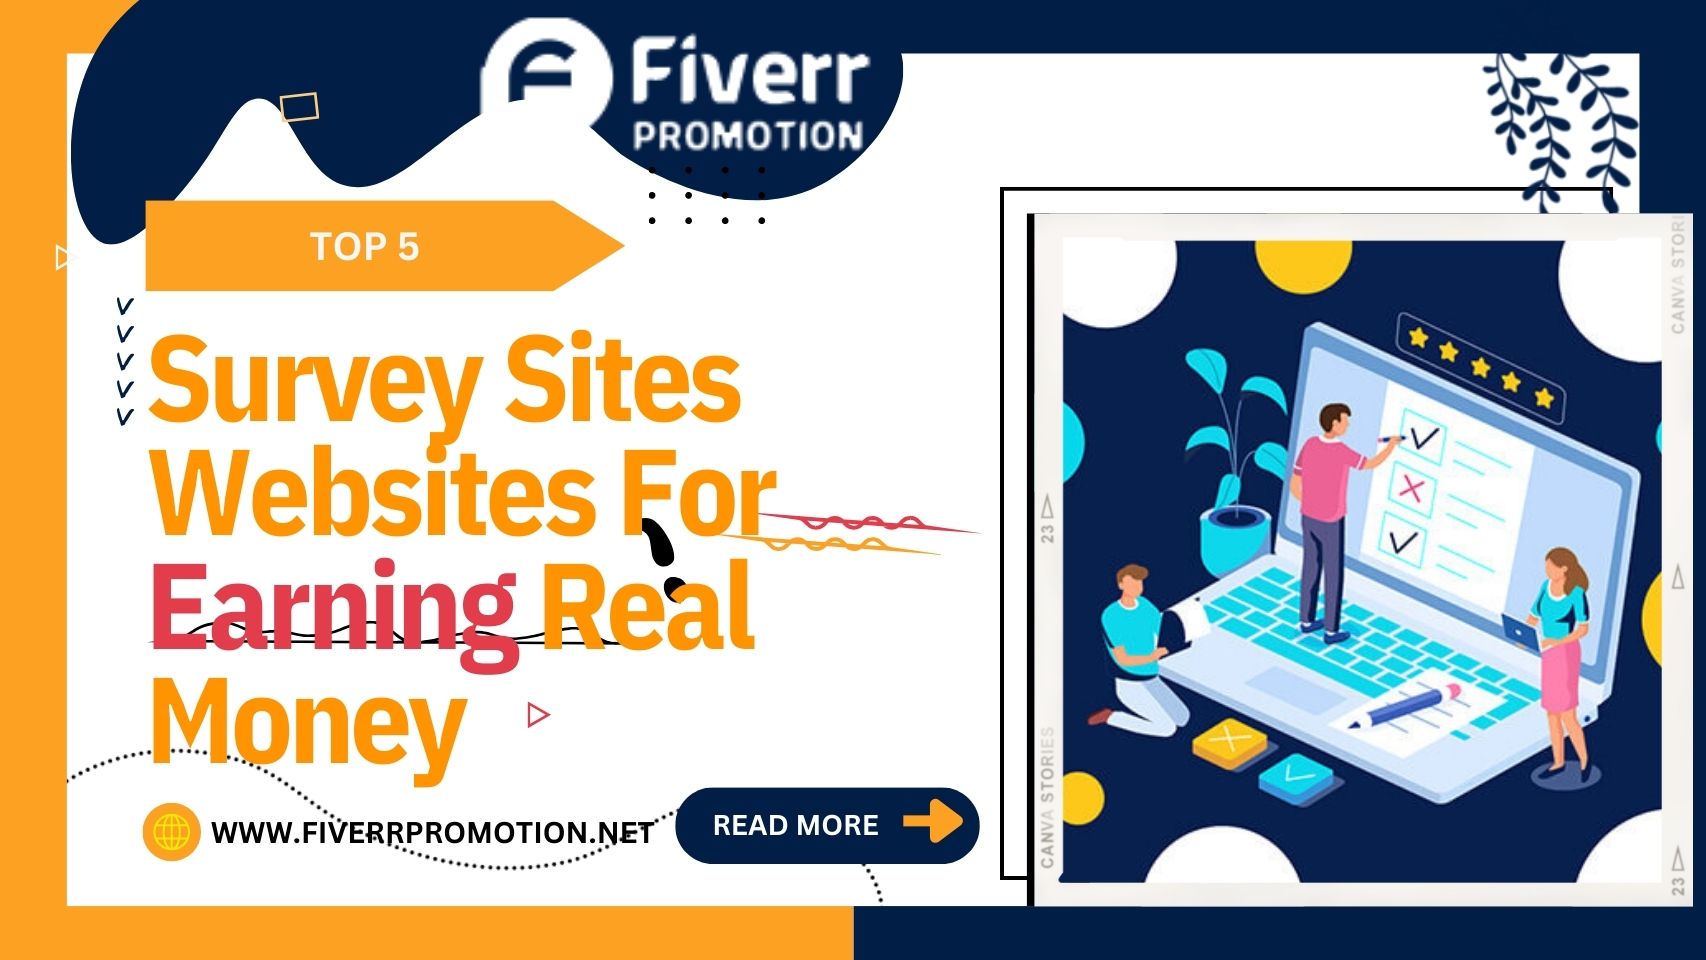 Top 5 survey sites websites for earning real money